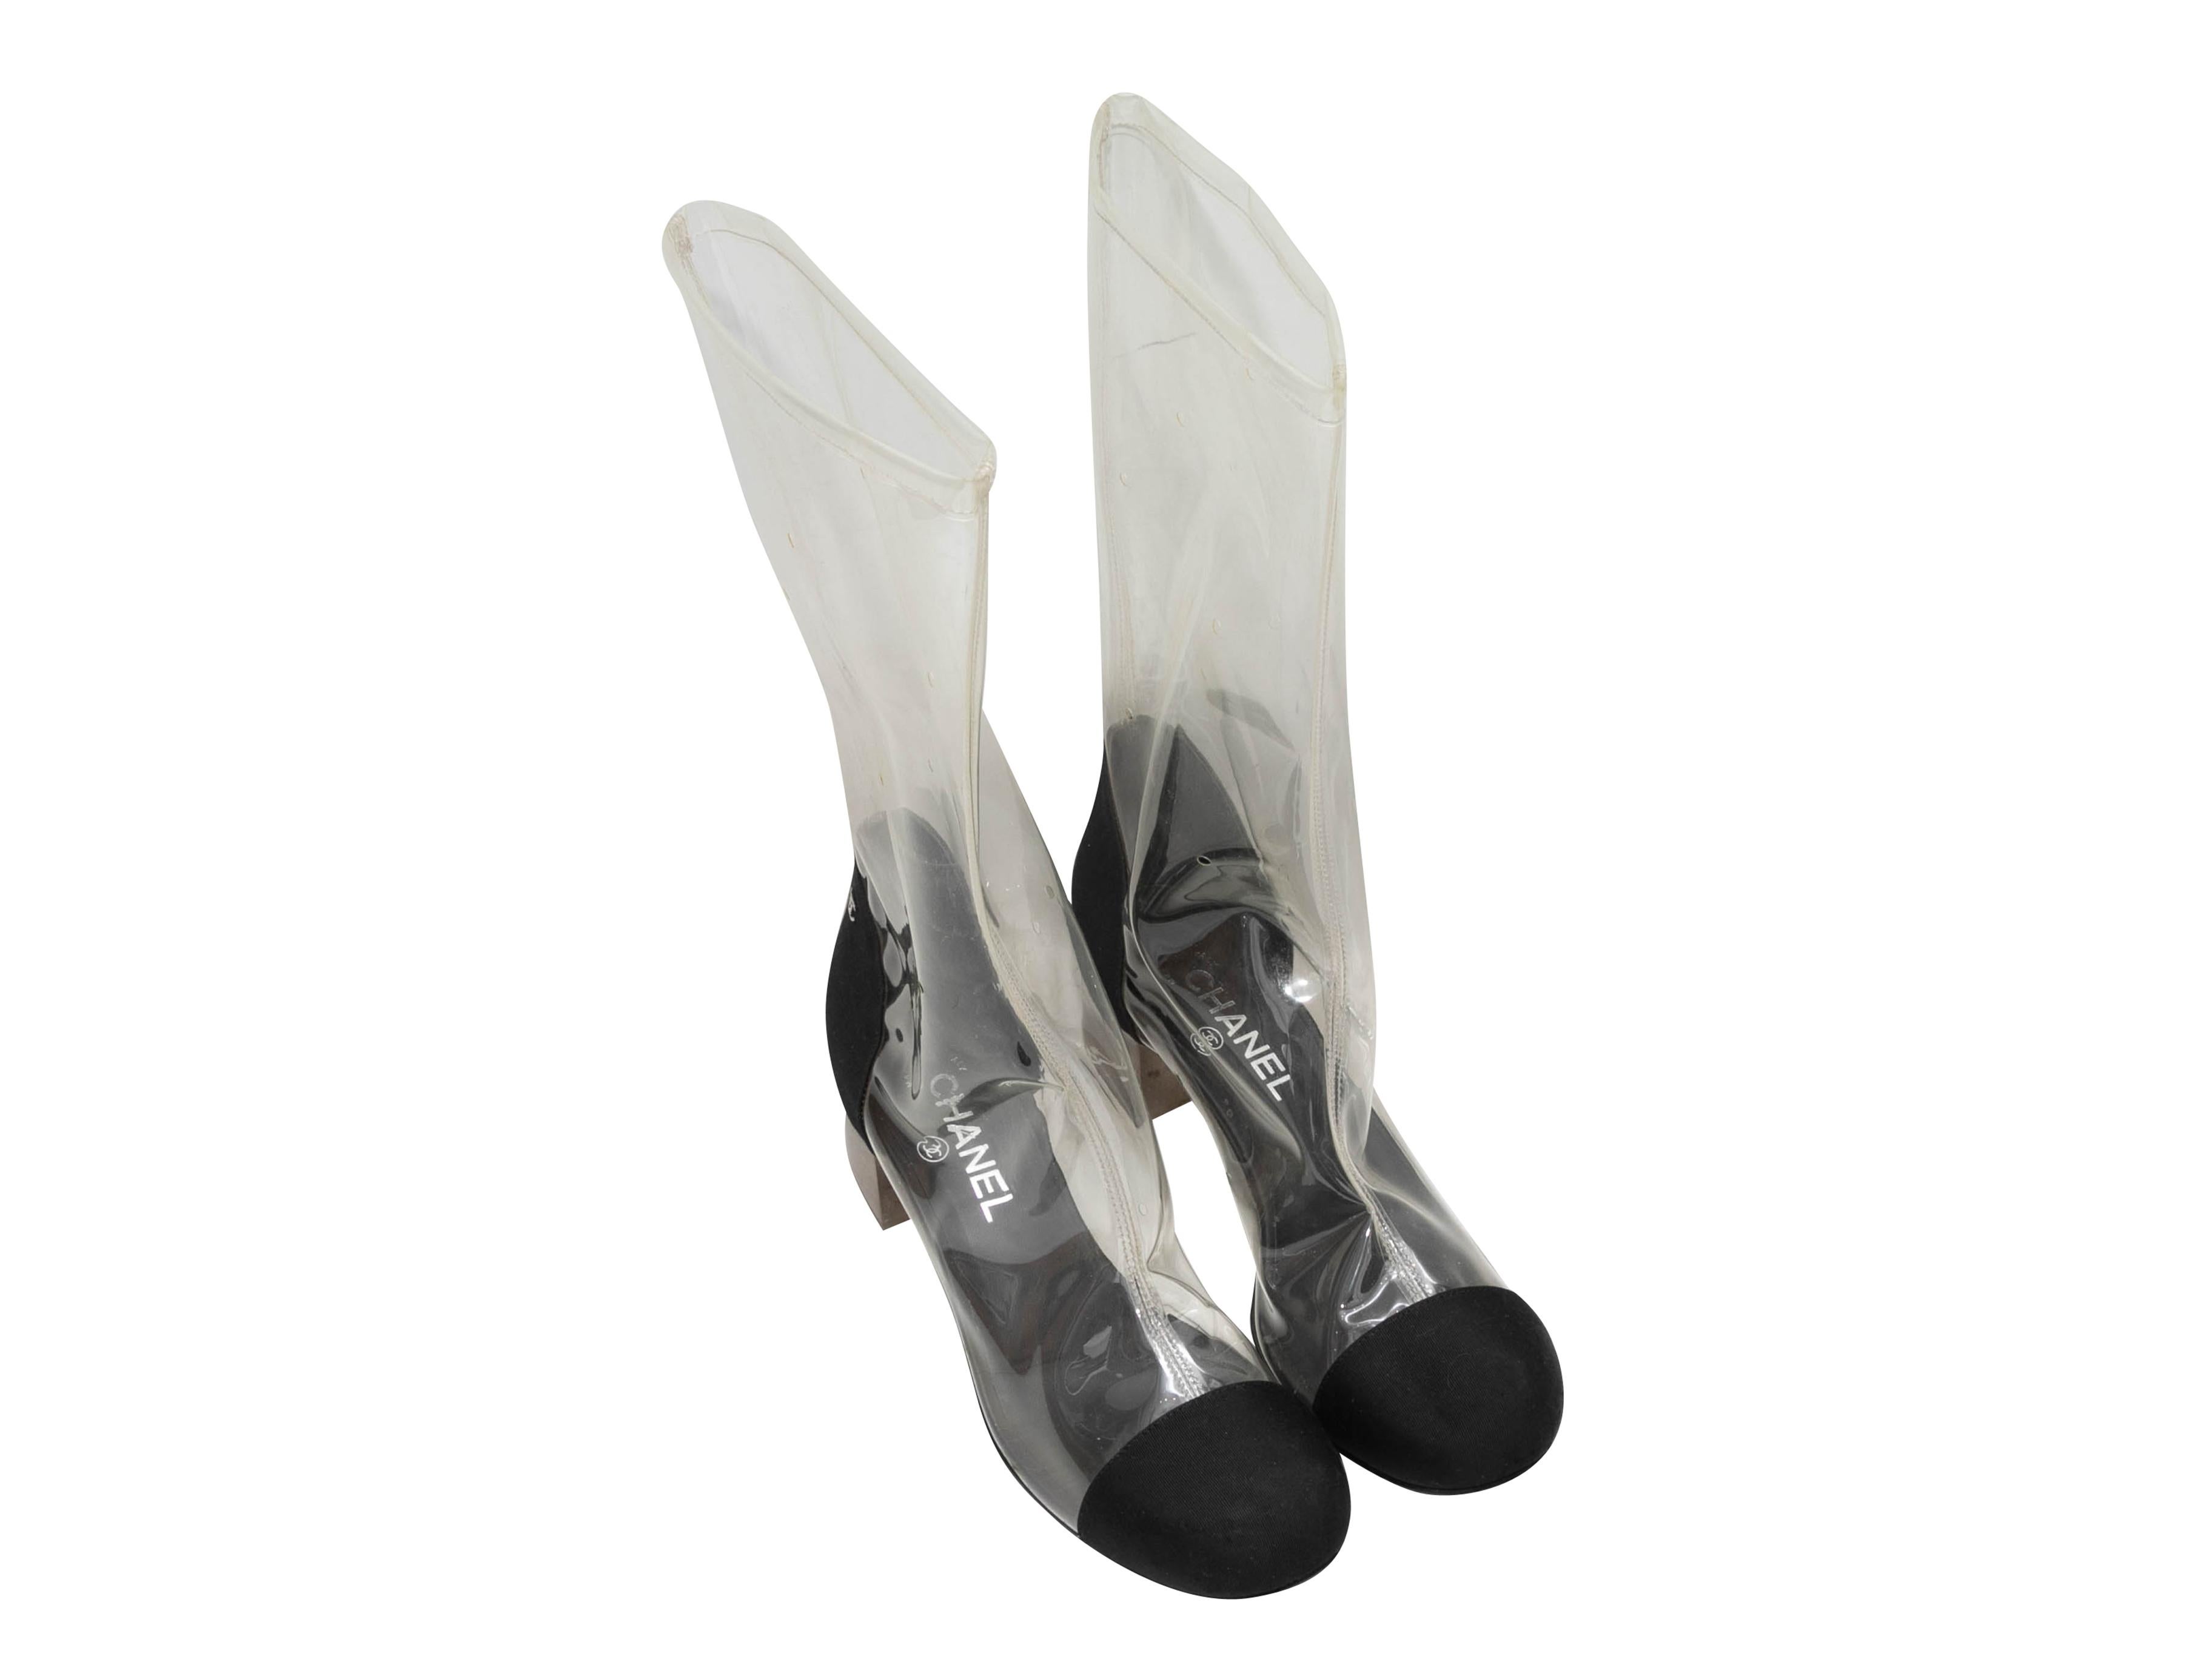 Clear PVC and black grosgrain cap-toe boots by Chanel. Circa 2018. Lucite block heels. 11